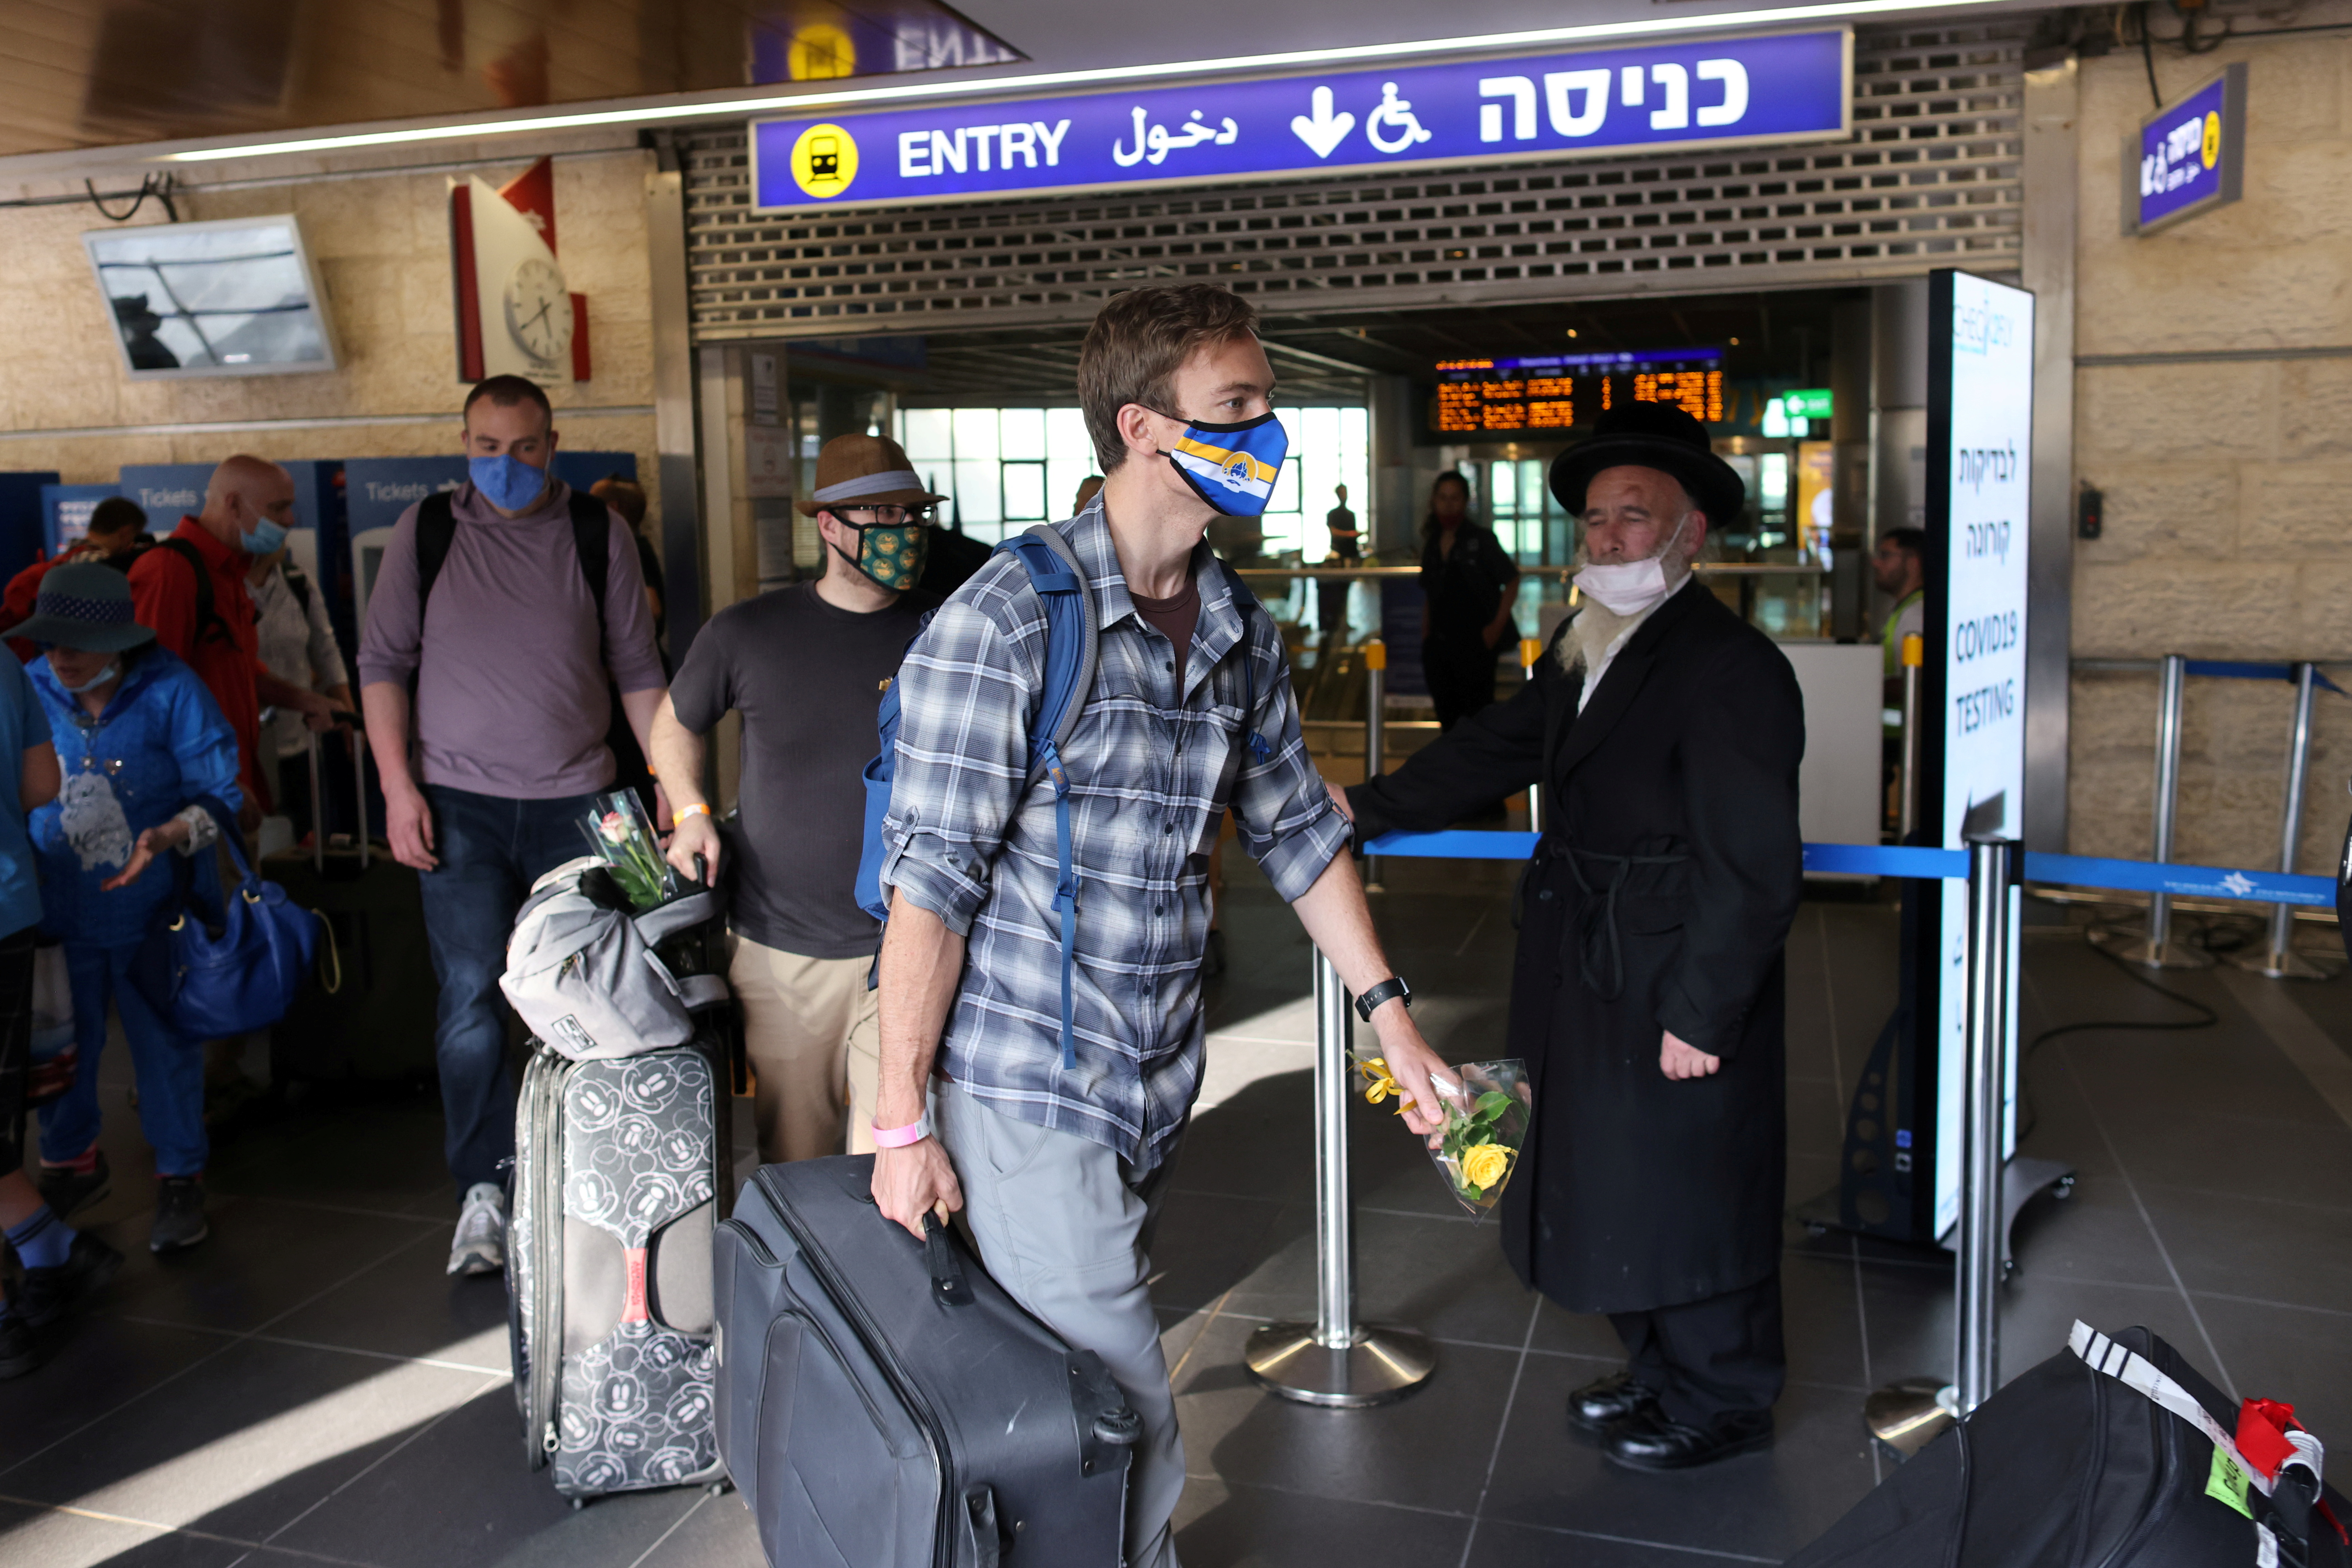 Tourists walk at the Ben Gurion International Airport after entering Israel by plane, as coronavirus disease (COVID-19) restrictions ease, in Lod, near Tel Aviv, Israel, May 27, 2021. REUTERS/Ronen Zvulun